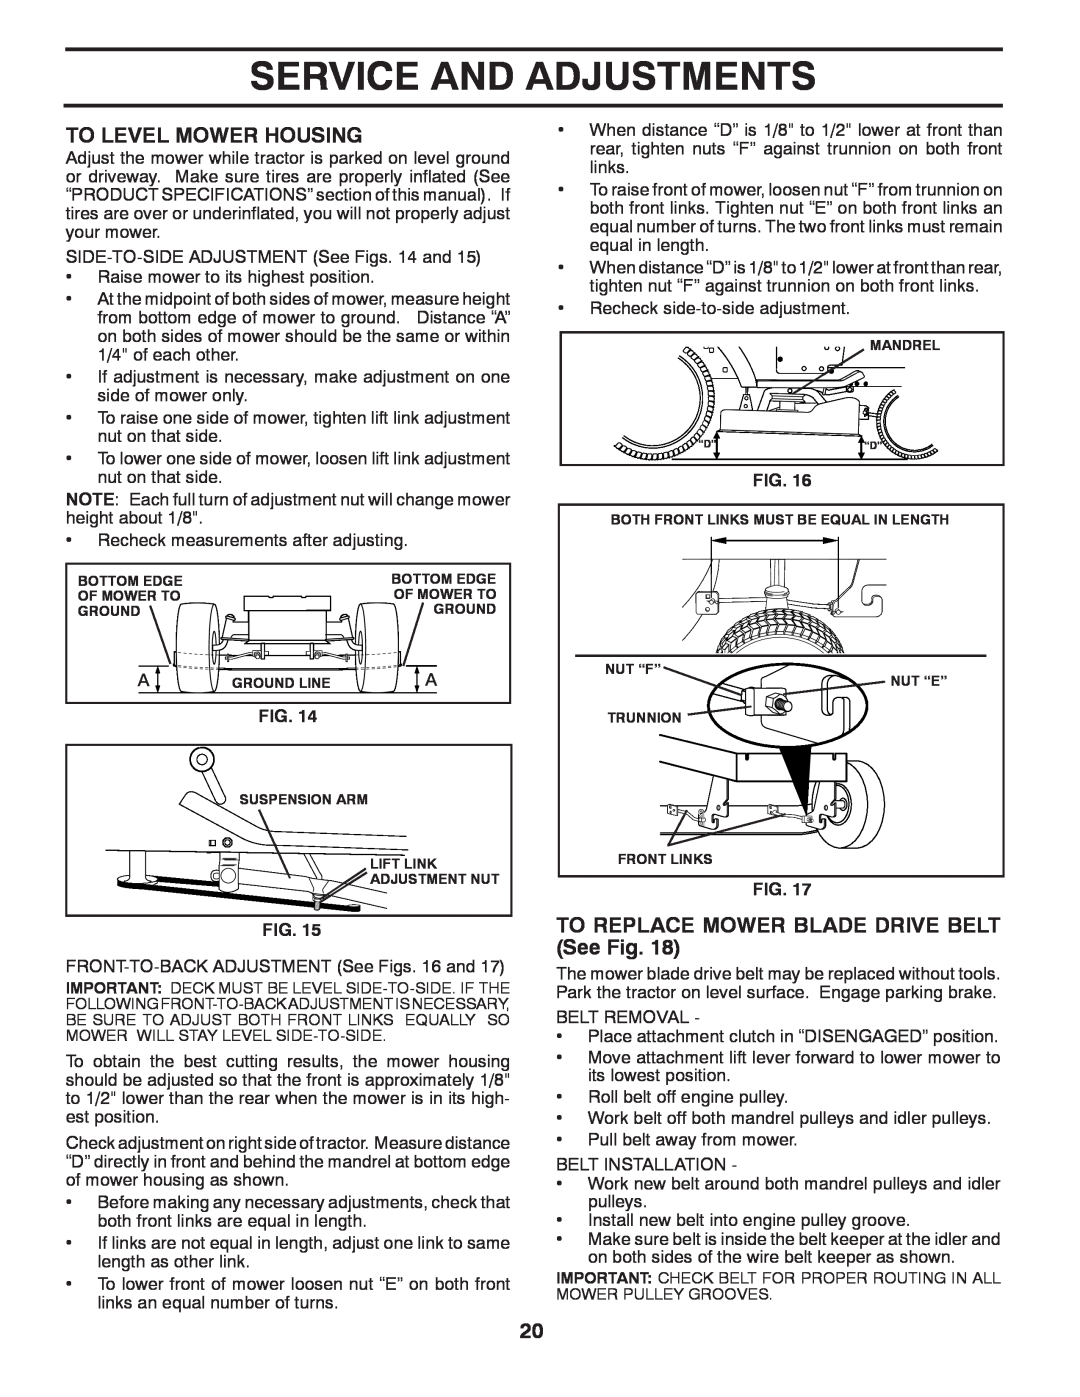 Poulan 960120068 manual To Level Mower Housing, TO REPLACE MOWER BLADE DRIVE BELT See Fig, Service And Adjustments 